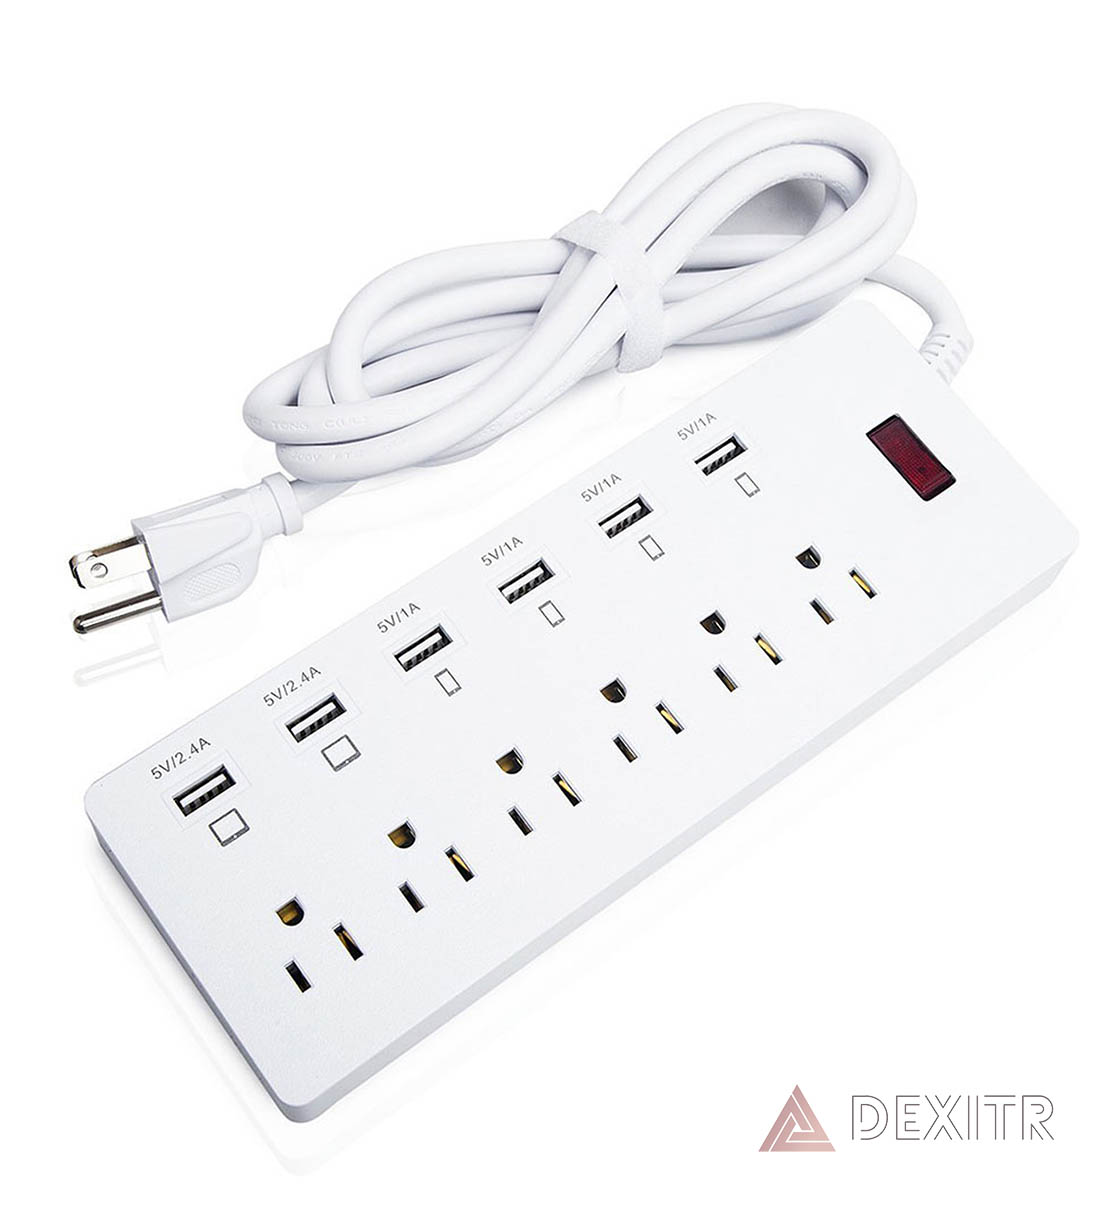 Power Strip Surge Protector with 6 USB Charging Ports and 6 Outlets 6ft Heavy Duty Extension Cord 1625W/13A Multiplug for Multiple Devices Smartphone Tablet Laptop Computer White